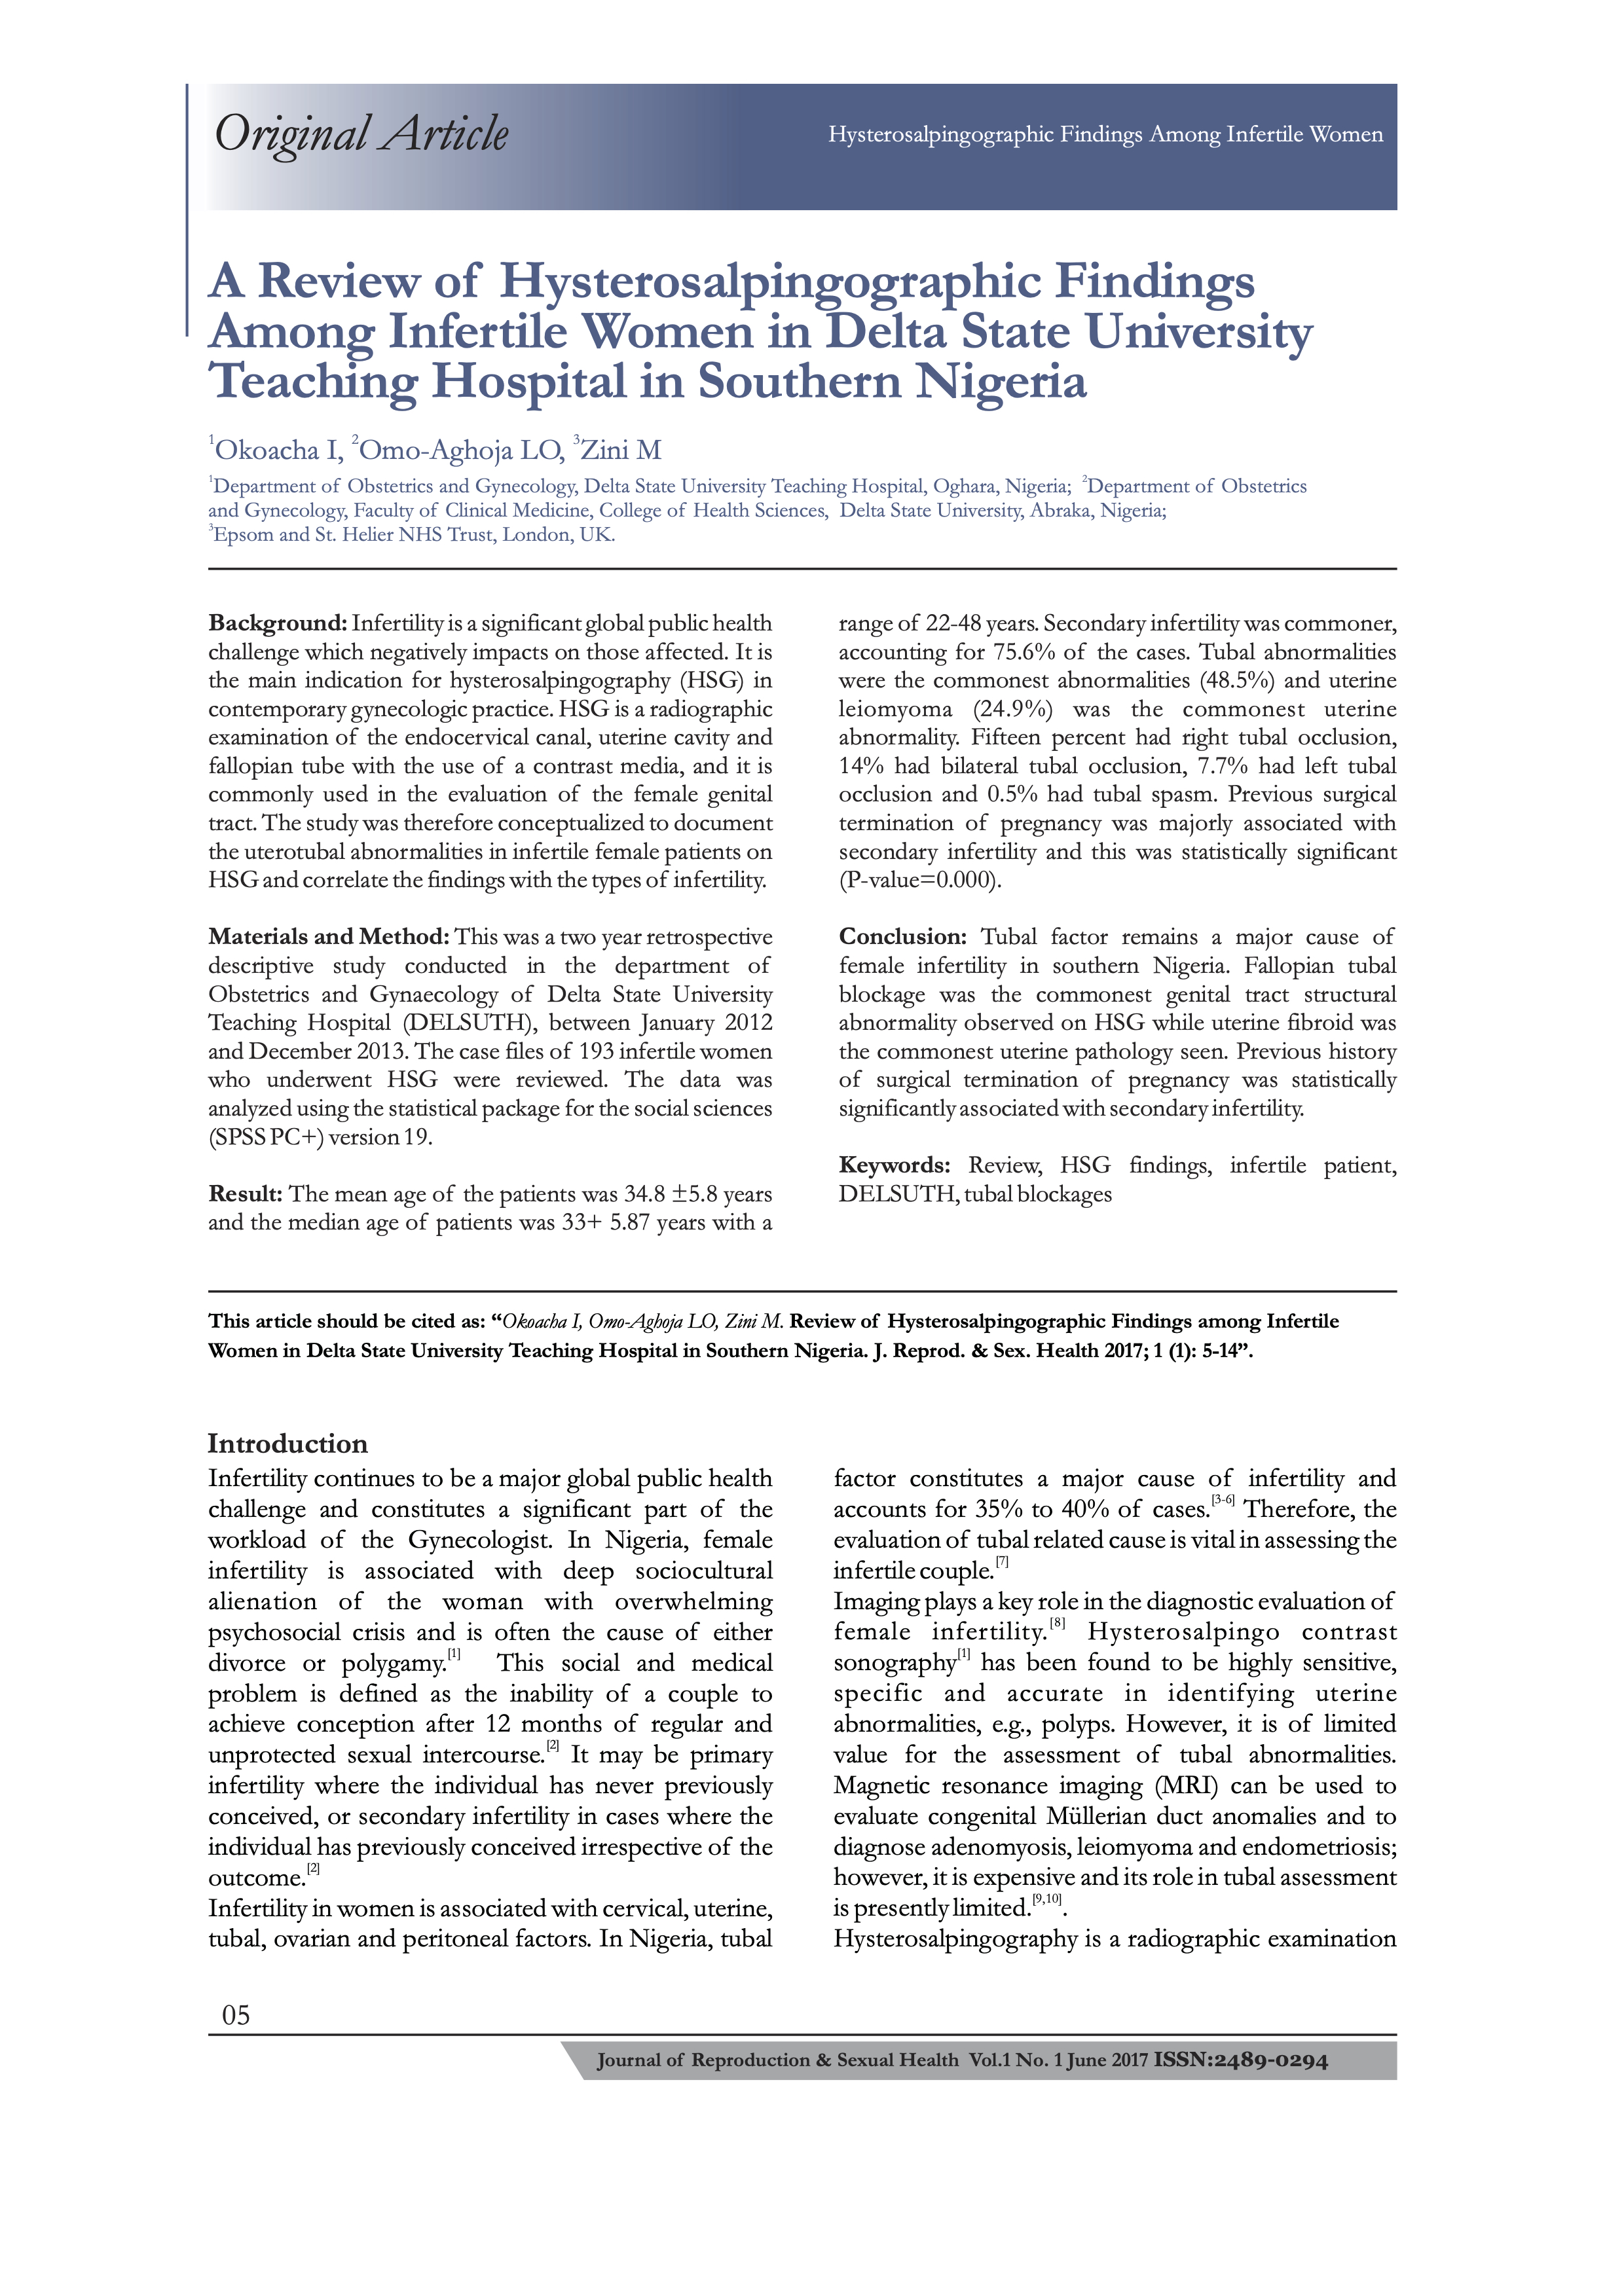 A Review of Hysterosalpingographic Findings among Infertile Women in Delta State University Teaching Hospital in Southern Nigeria